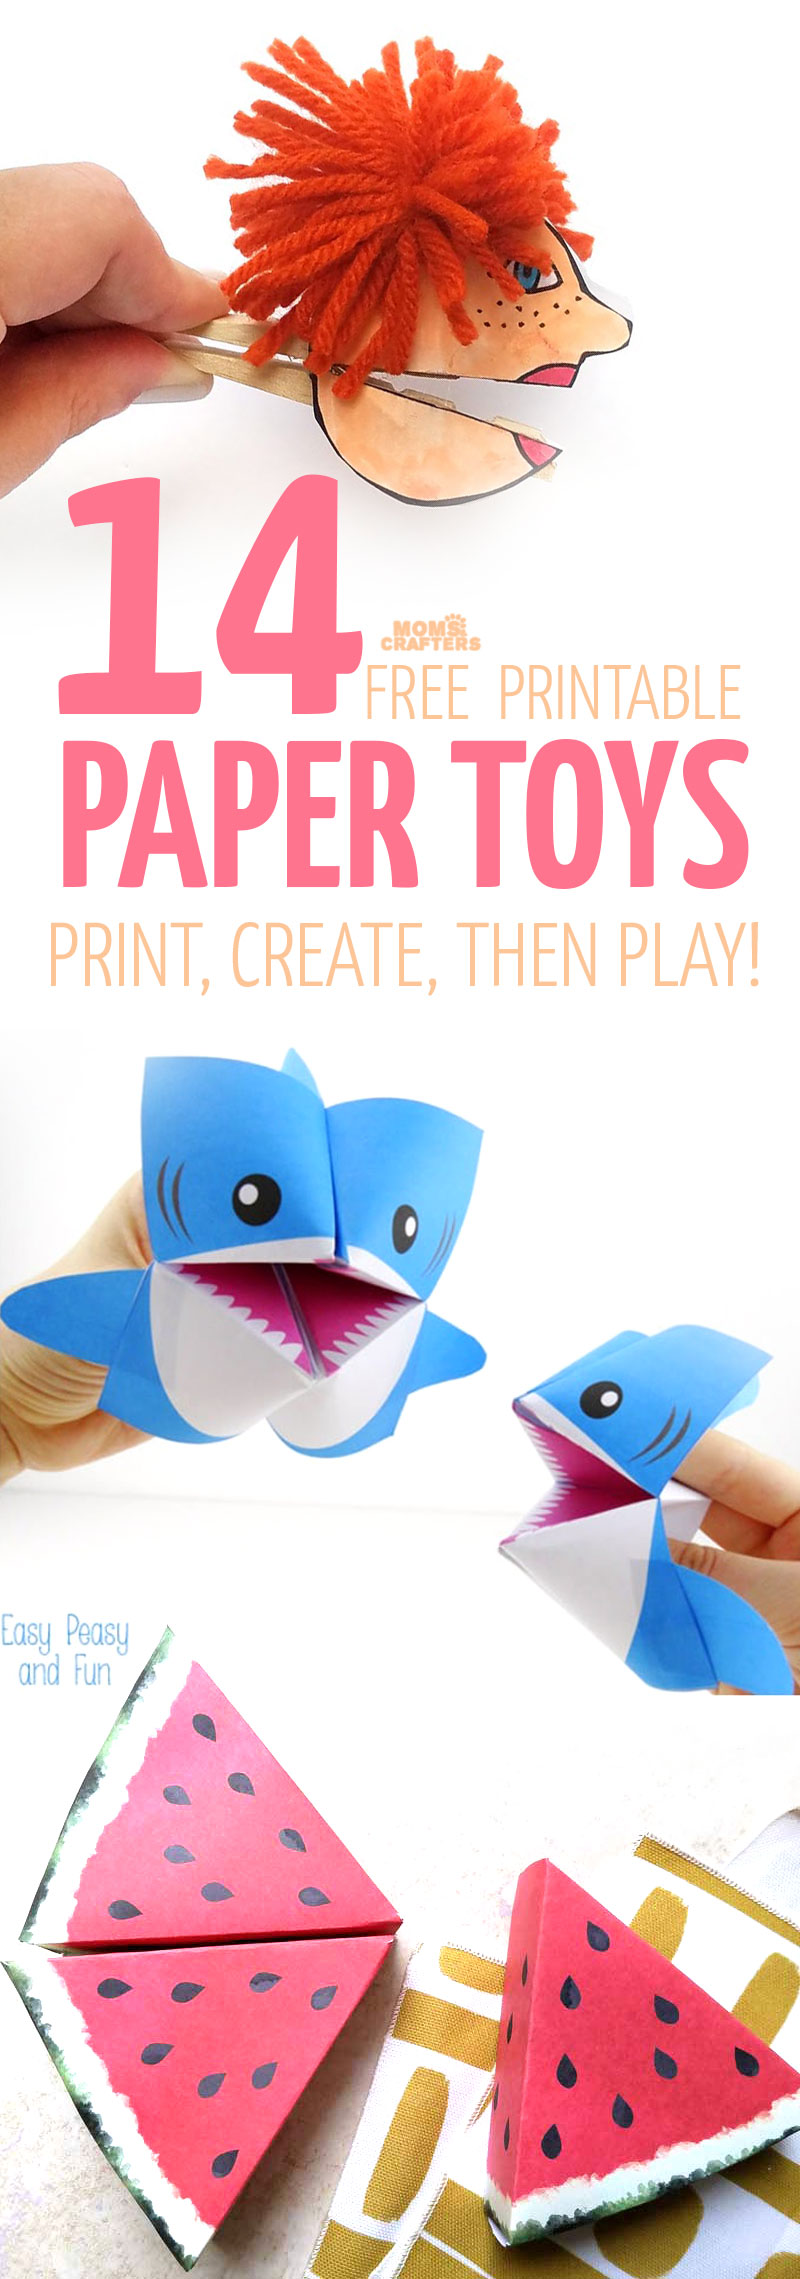 Paper Toy Templates - 14 Free Printables to Craft and Play! - Paper Toy Templates - 14 Free Printables to Craft and Play! -   19 diy Paper toy ideas